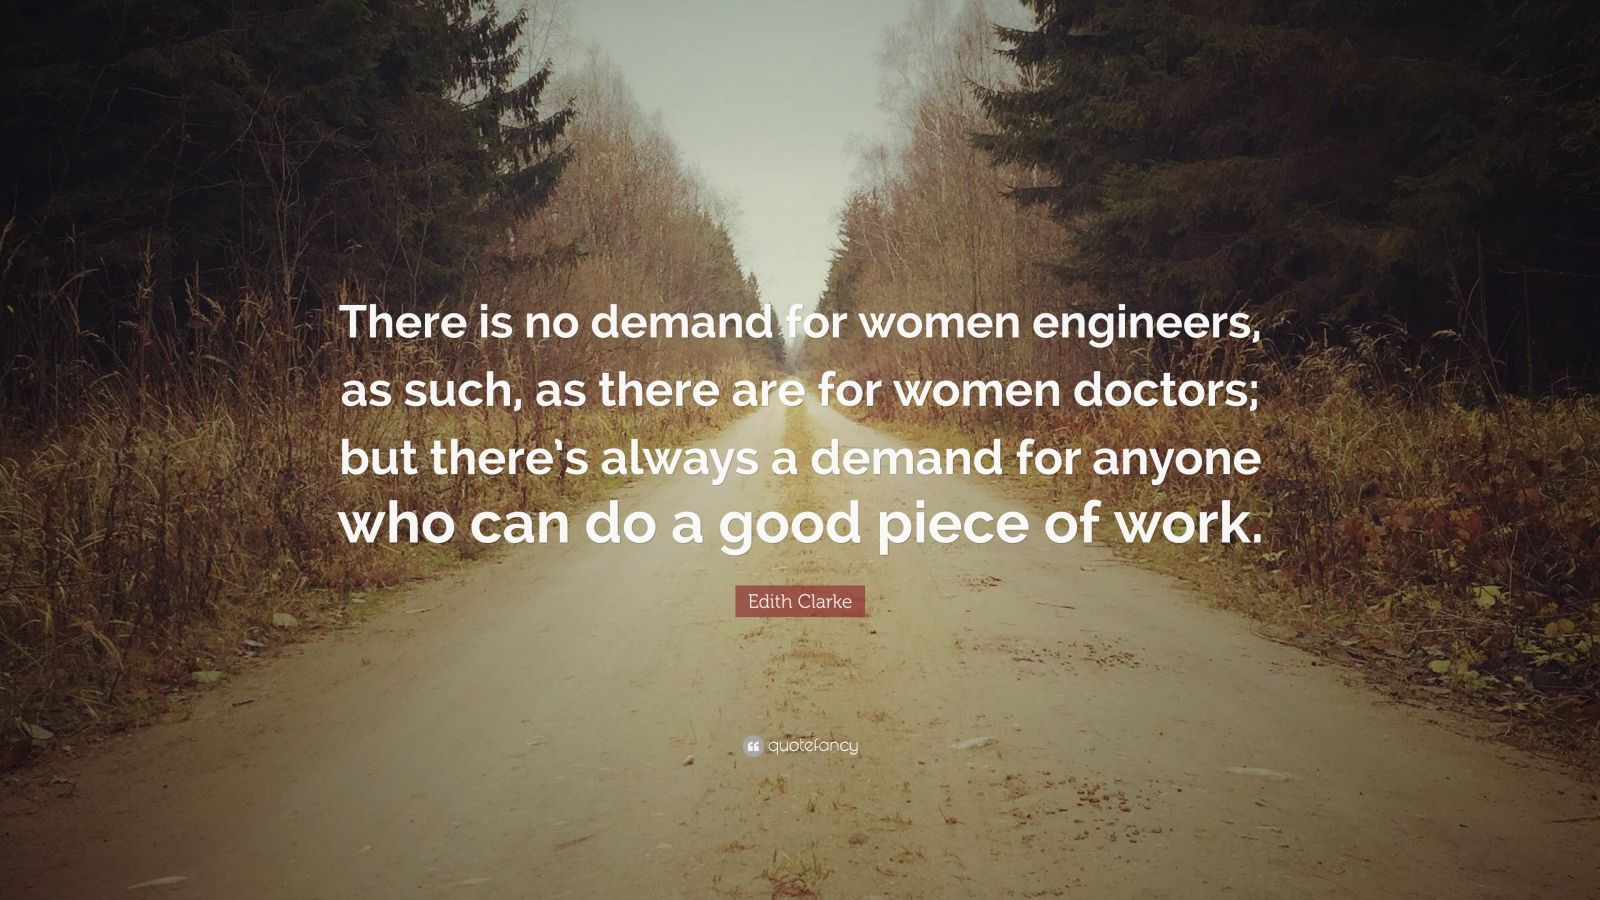 Edith Clarke Quote: “There is no demand for women engineers, as such